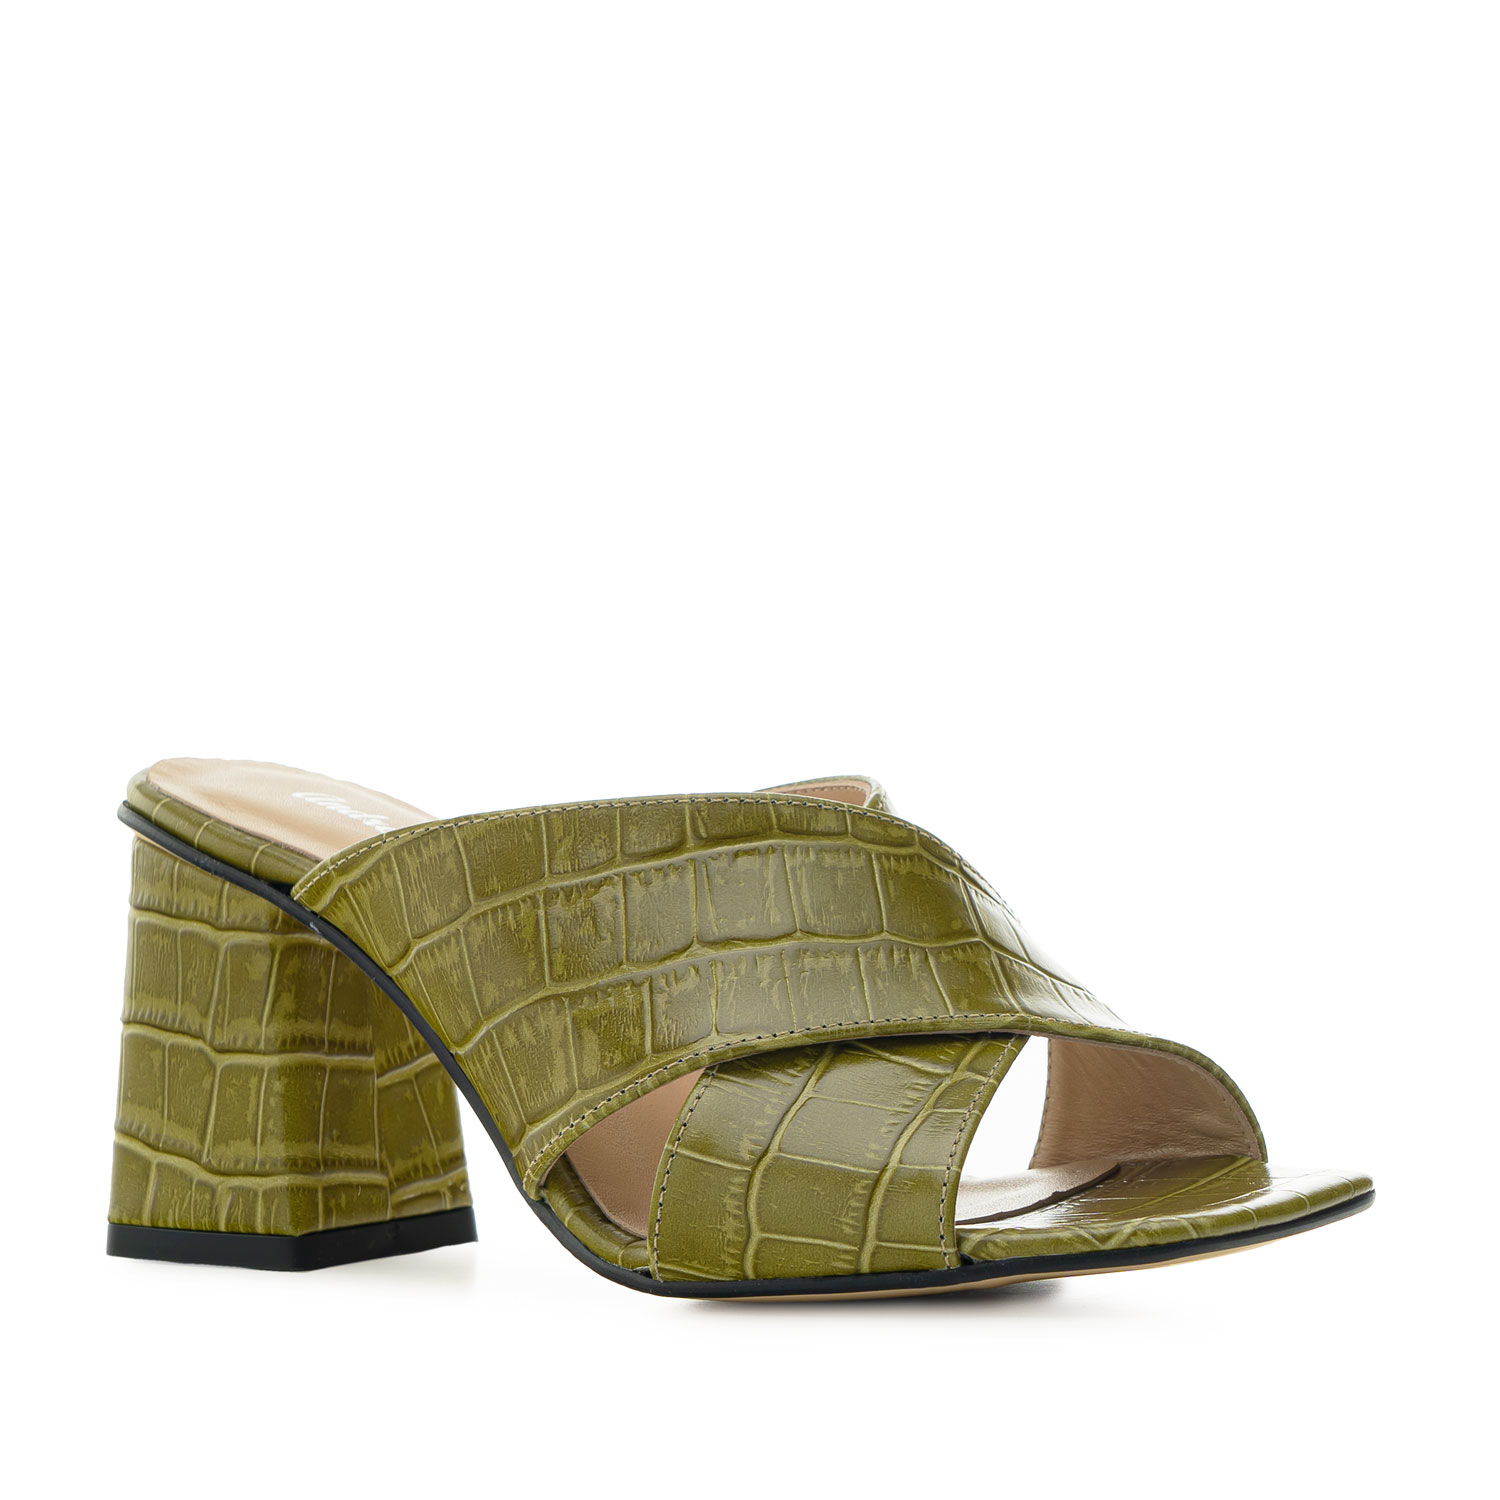 Sandals in Black Olive Green Leather 